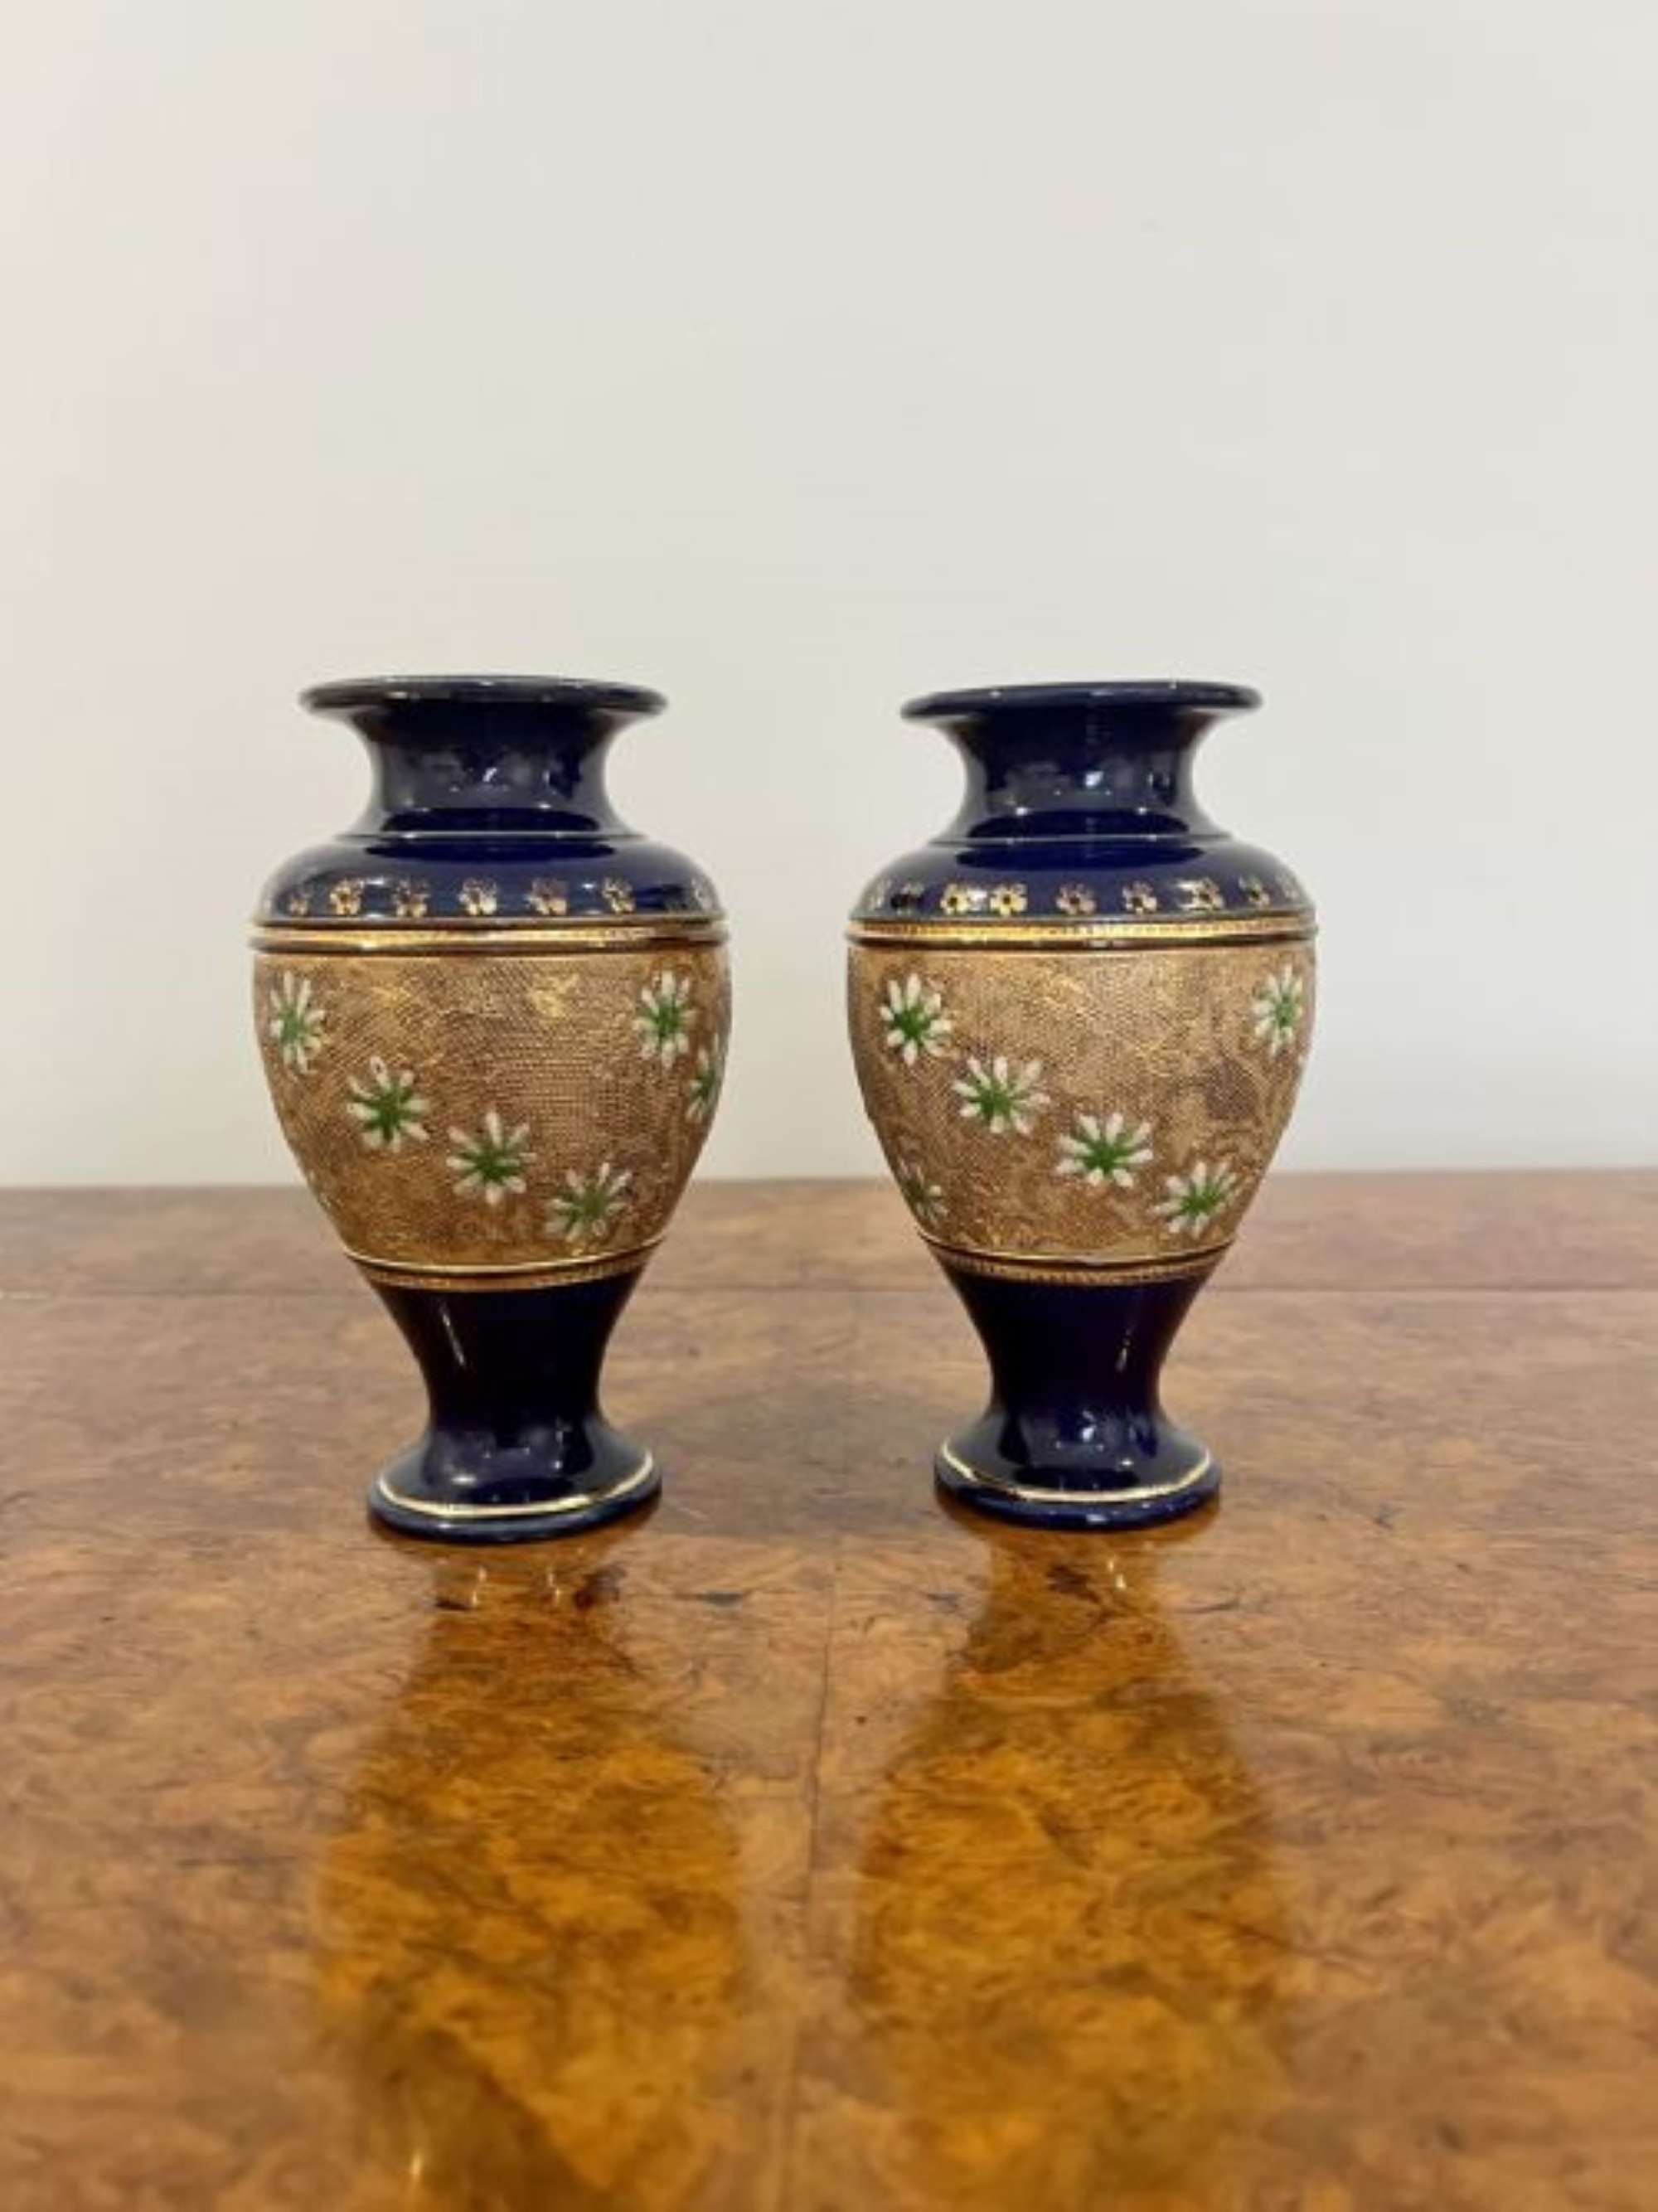 LOVELY SMALL PAIR OF ANTIQUE VICTORIAN ROYAL DOULTON VASES